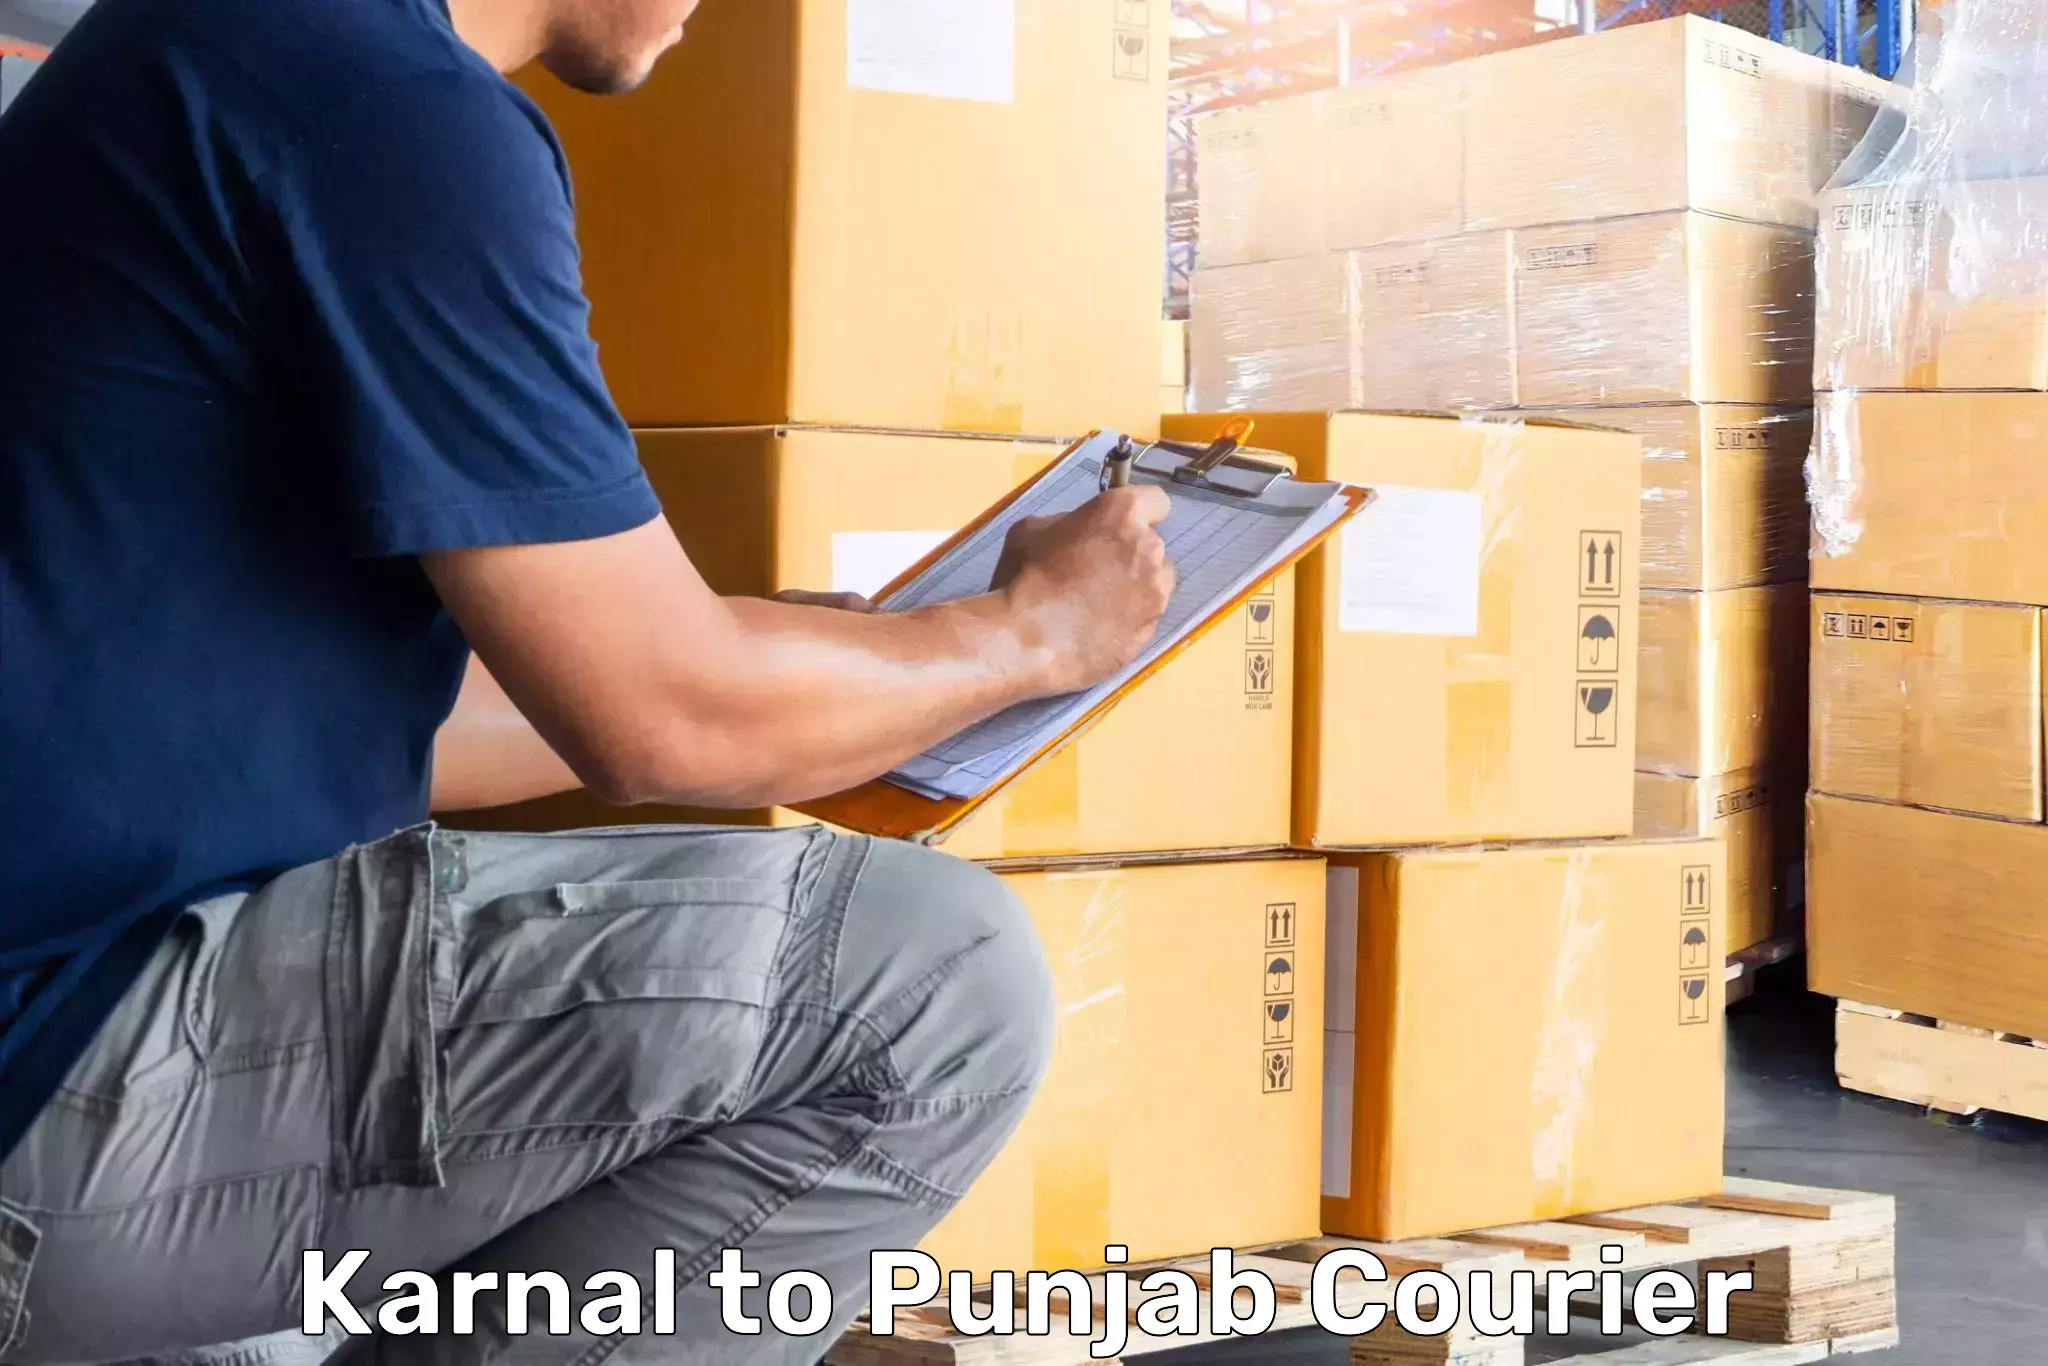 Online luggage shipping Karnal to Mohali